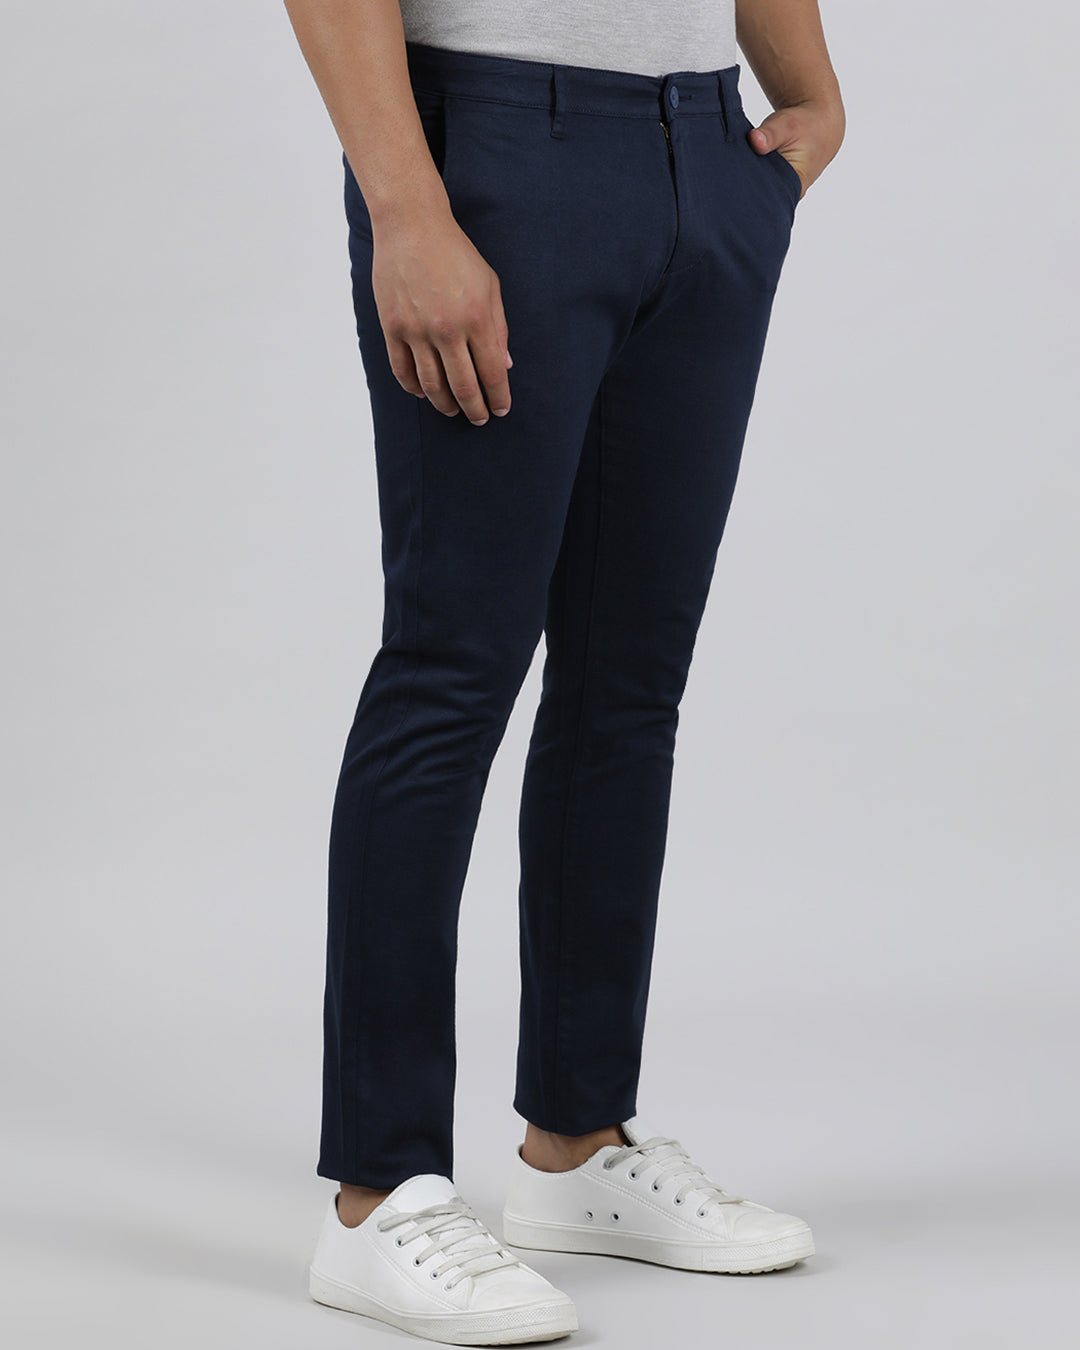 Casual Slim Fit Printed Navy Trousers for Men